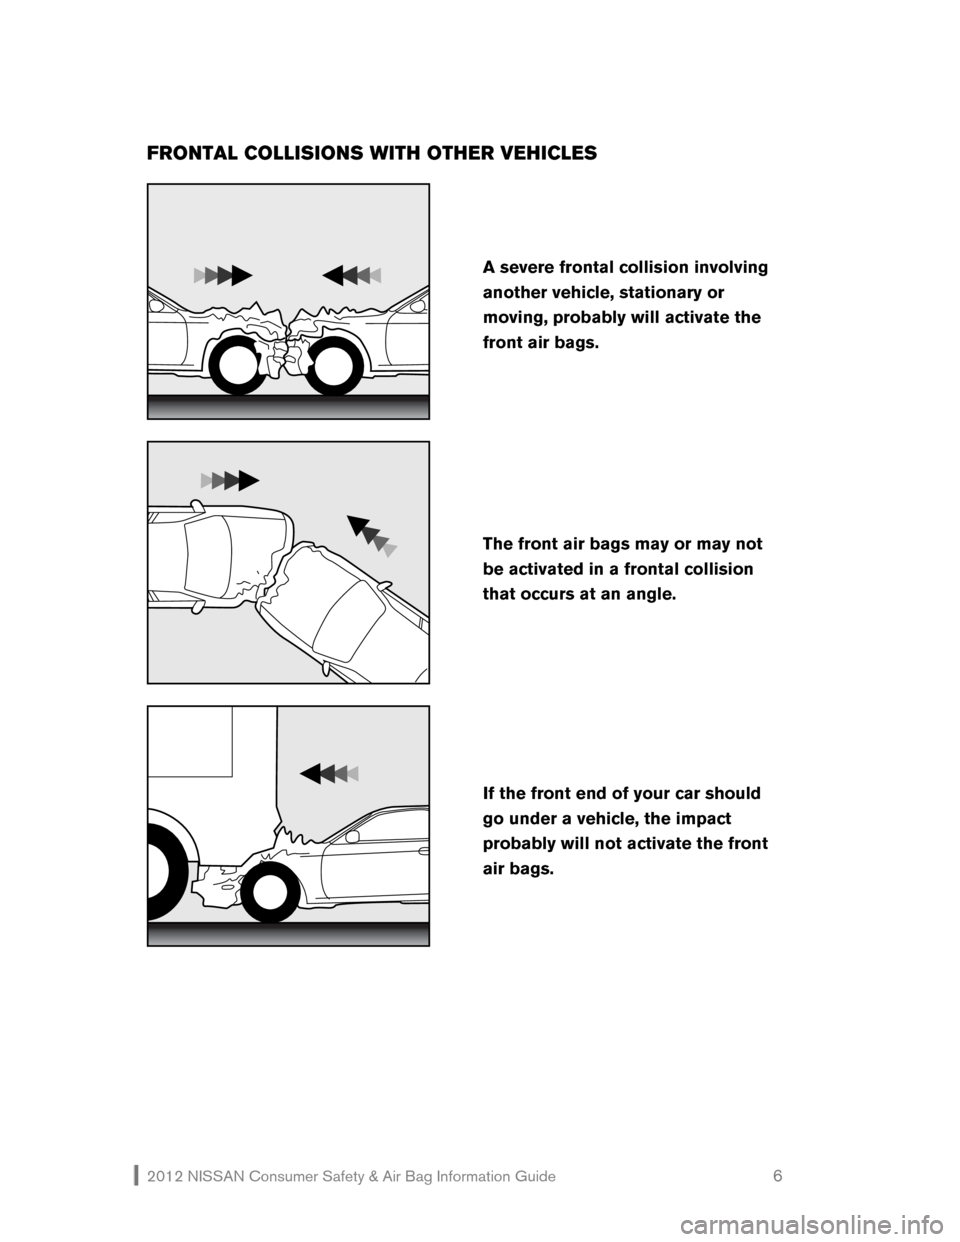 NISSAN ARMADA 2012 1.G Consumer Safety Air Bag Information Guide 2012 NISSAN Consumer Safety & Air Bag Information Guide                                                   6 
FRONTAL COLLISIONS WITH OTHER VEHICLES 
 
 
 
 
If the front end of your car should 
go und